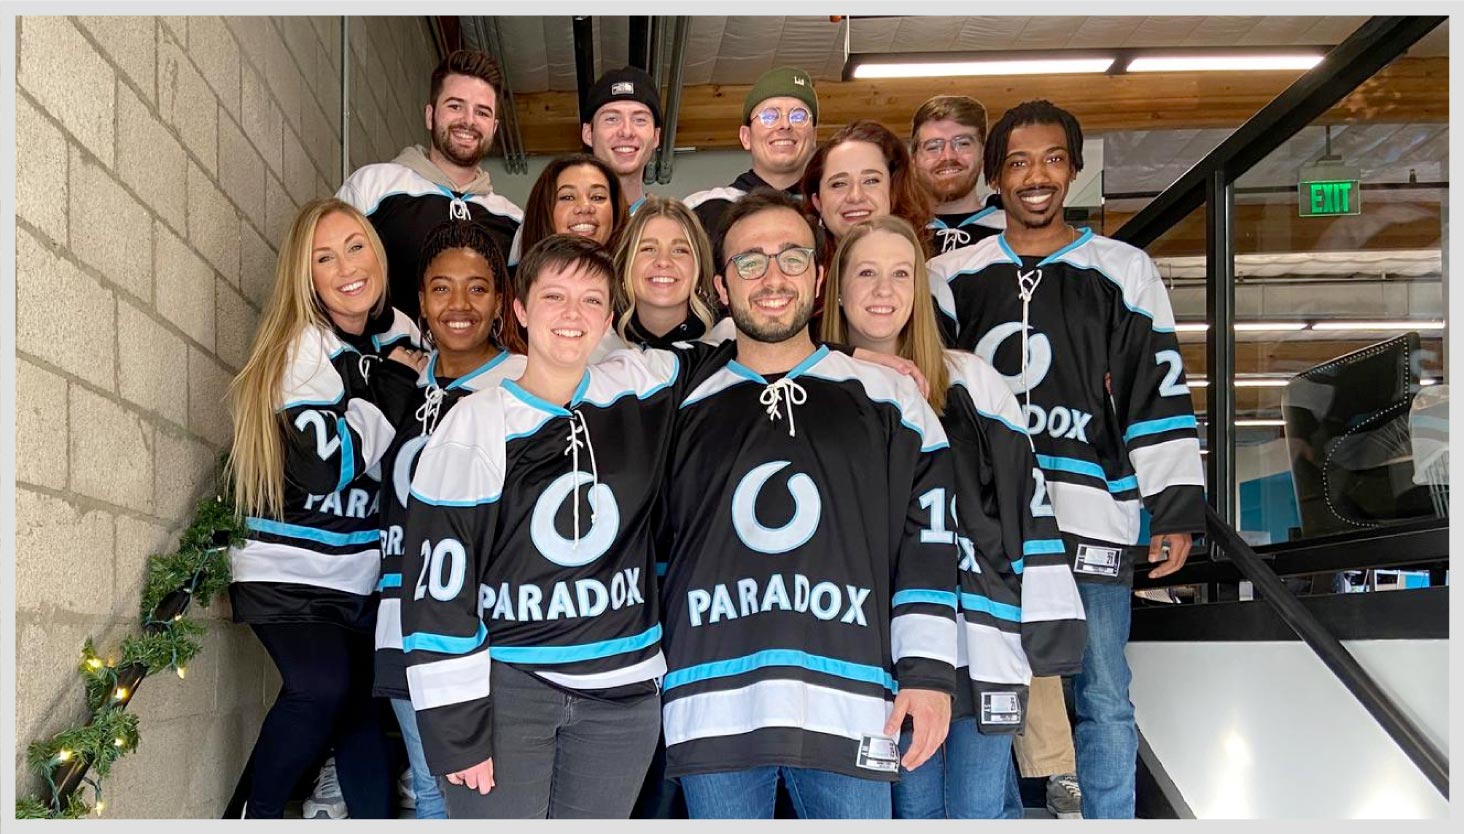 Photograph of the Paradox team